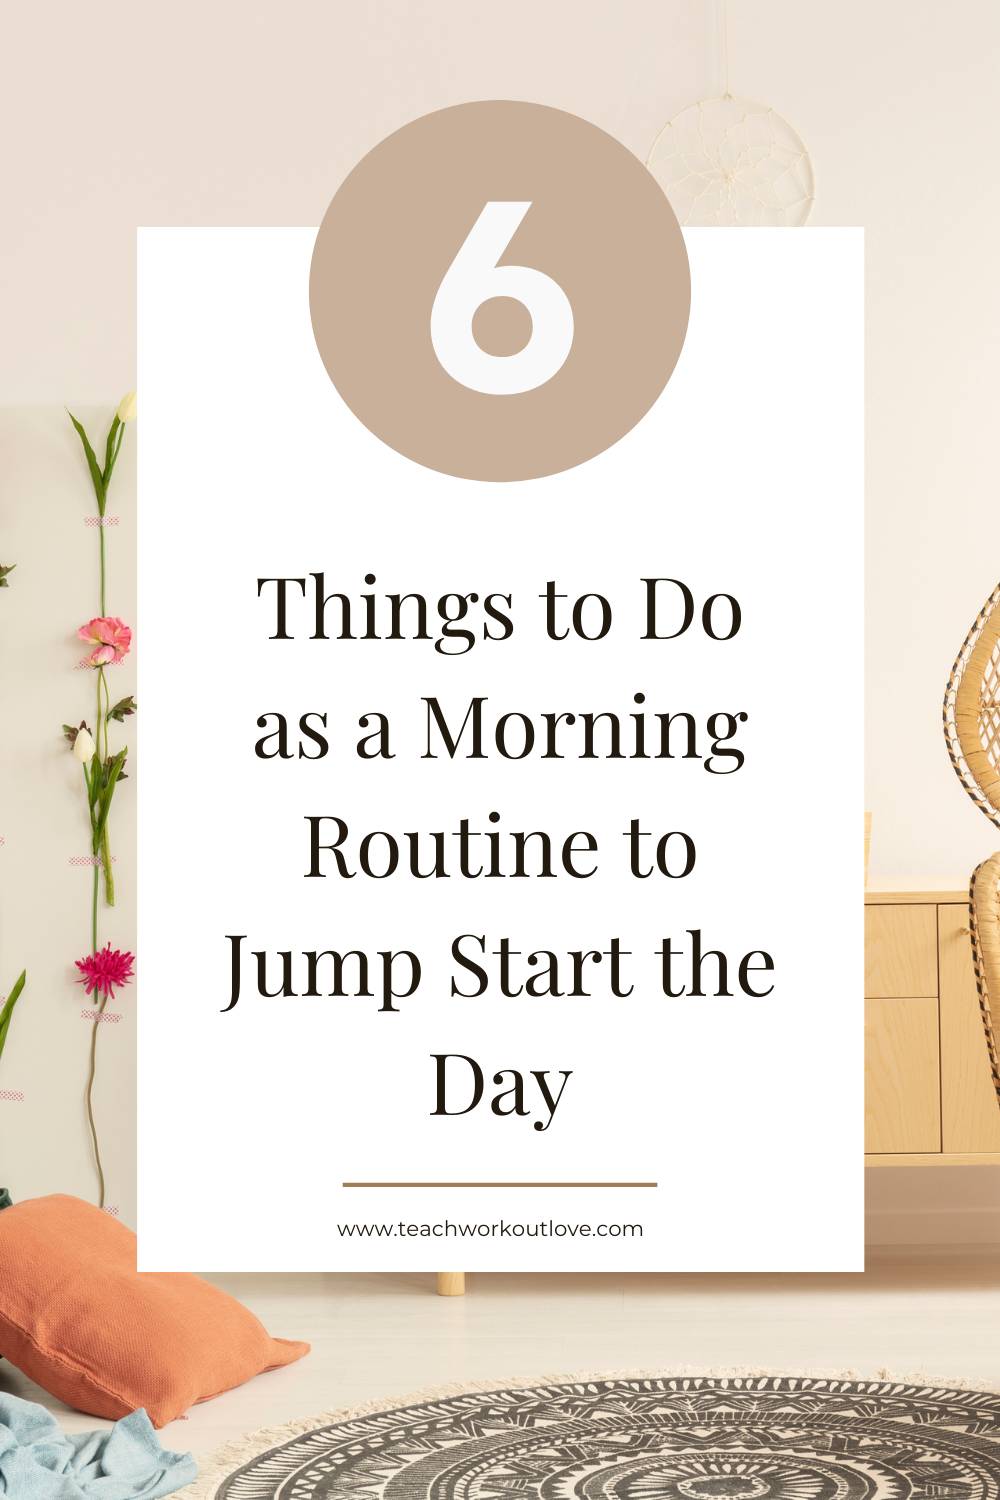 Need a jump start to your day? With these 6 steps, you can begin to change how you do your morning routine and feel good. 